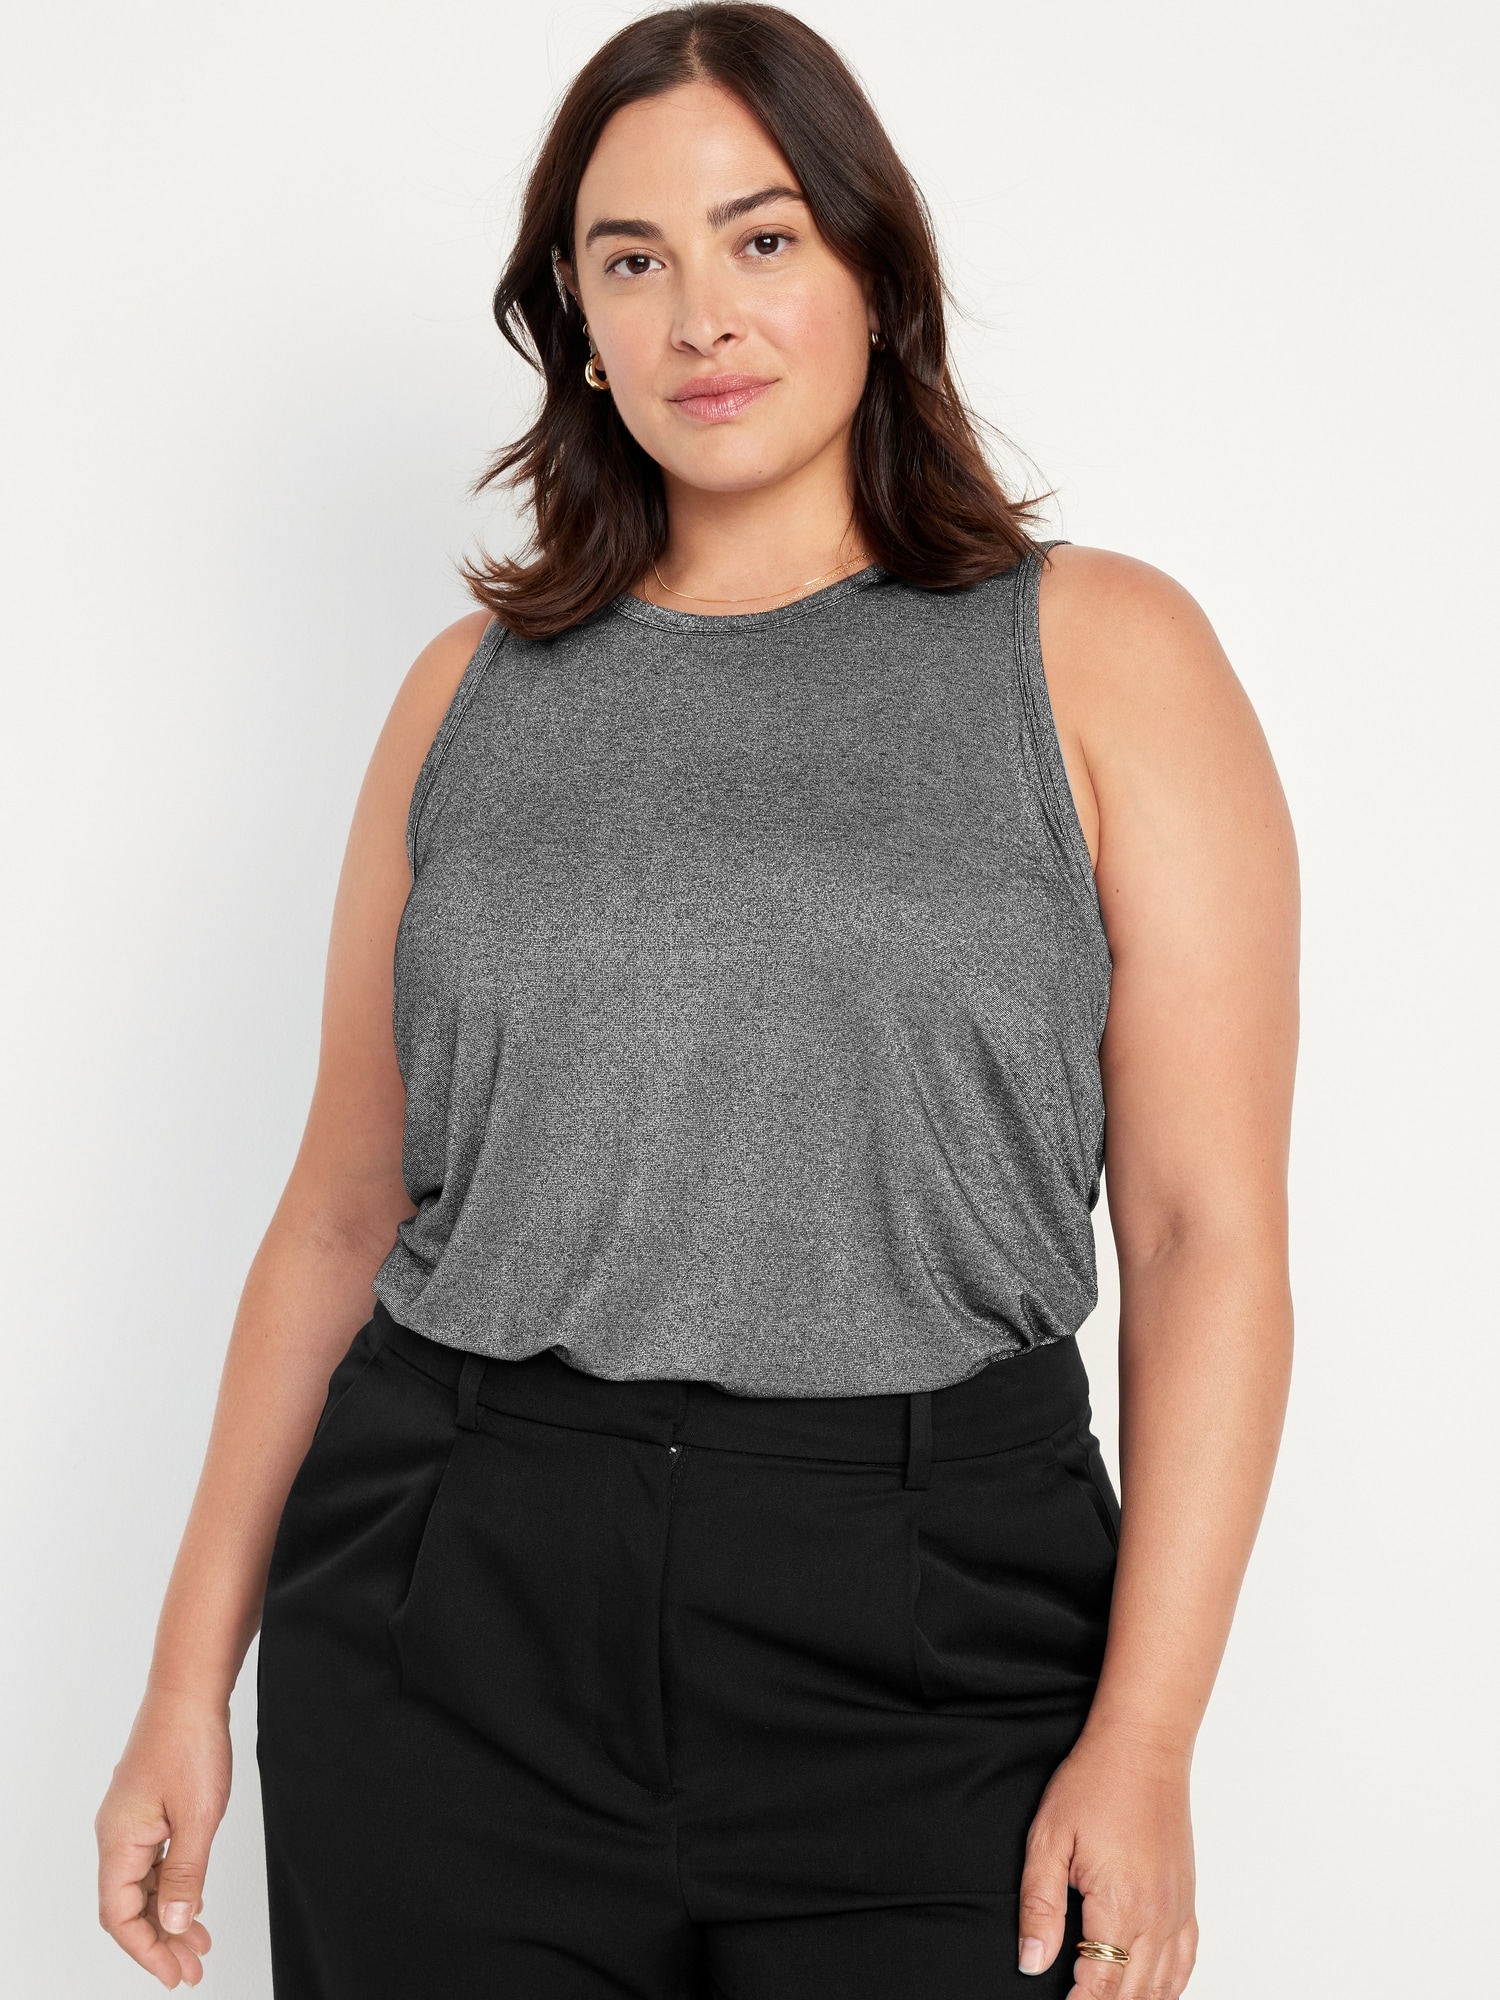 Luxe Sleeveless Glimmer Top for Women | Old Navy